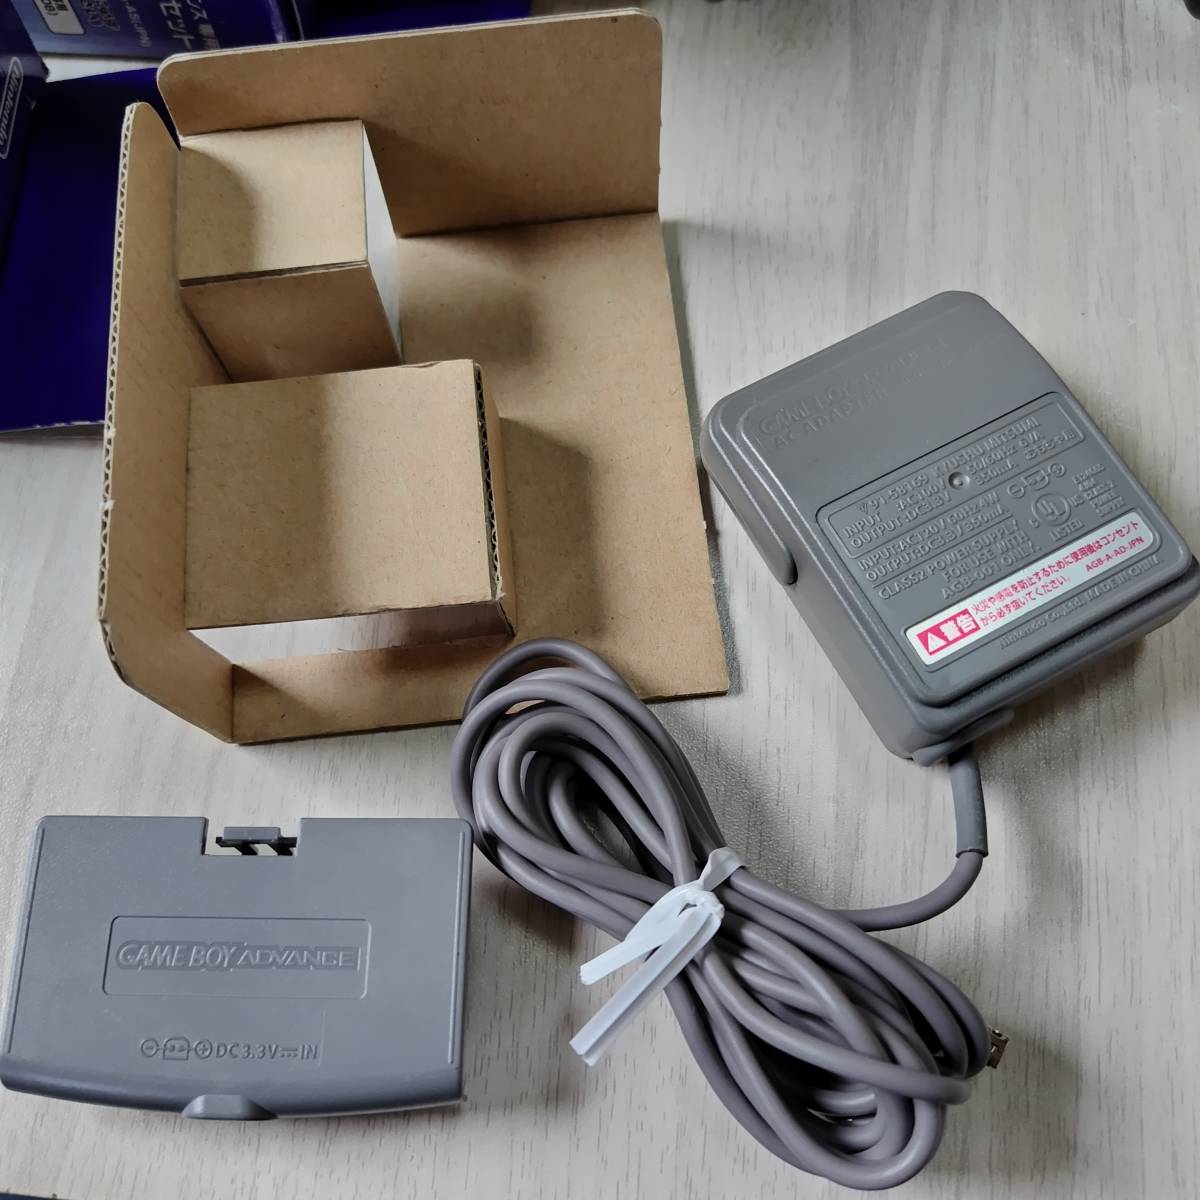 * Game Boy Advance exclusive use AC adaptor set box attaching what pcs . including in a package possible *1